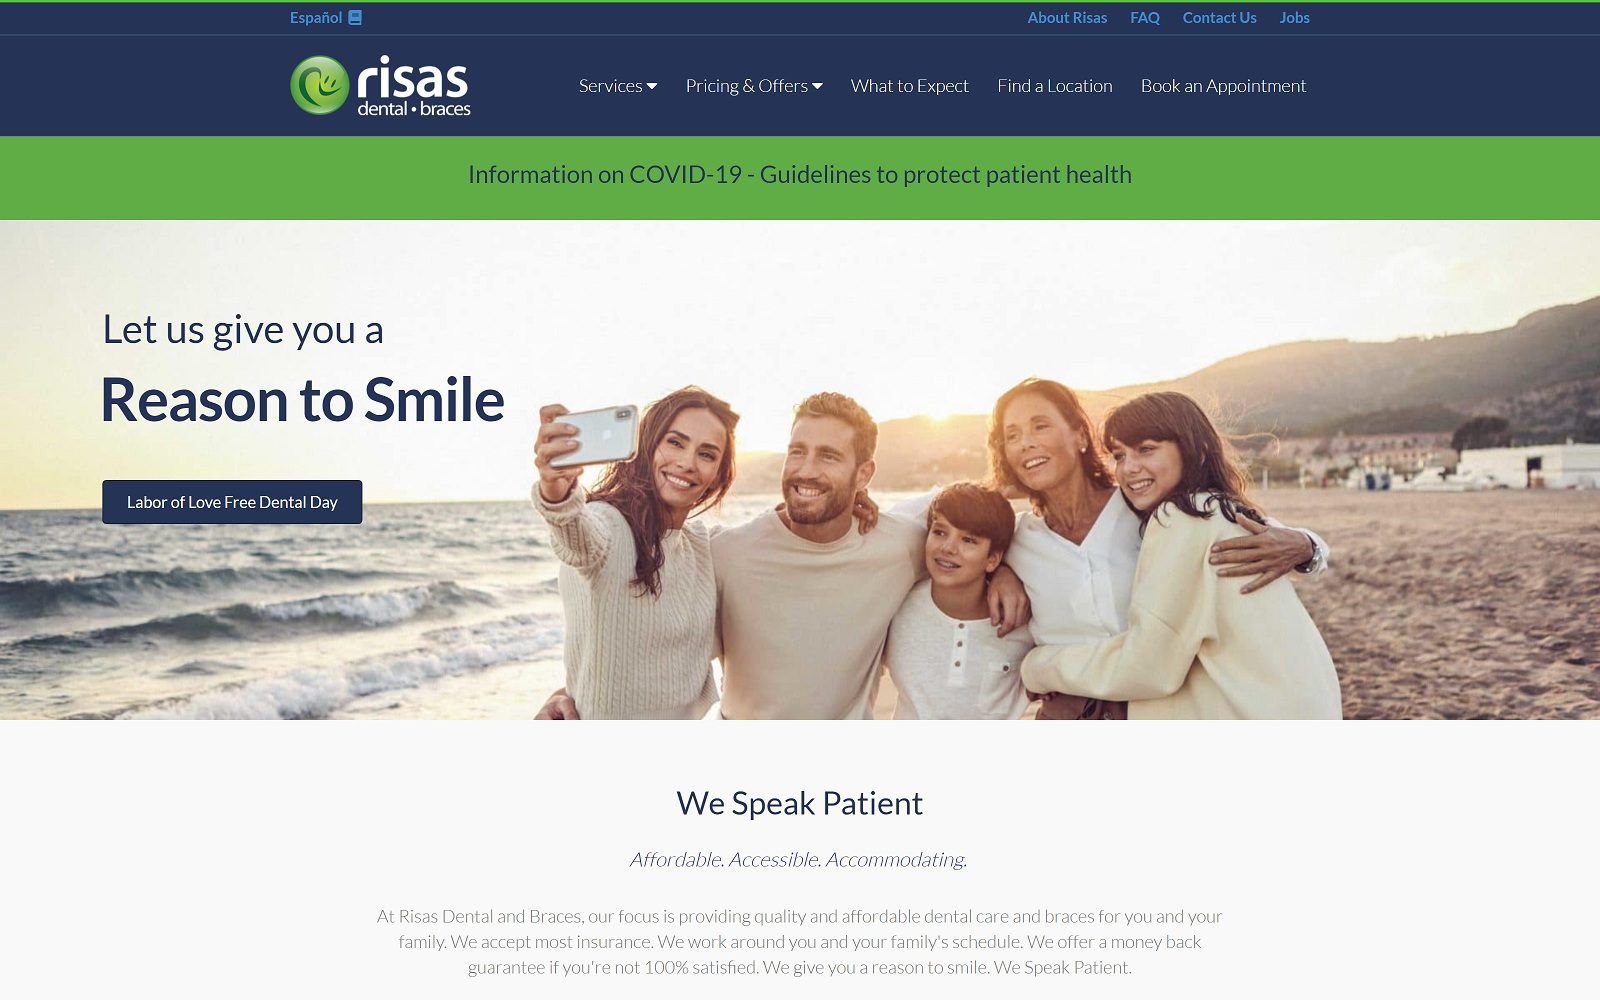 The screenshot of risas dental and braces - civic center website